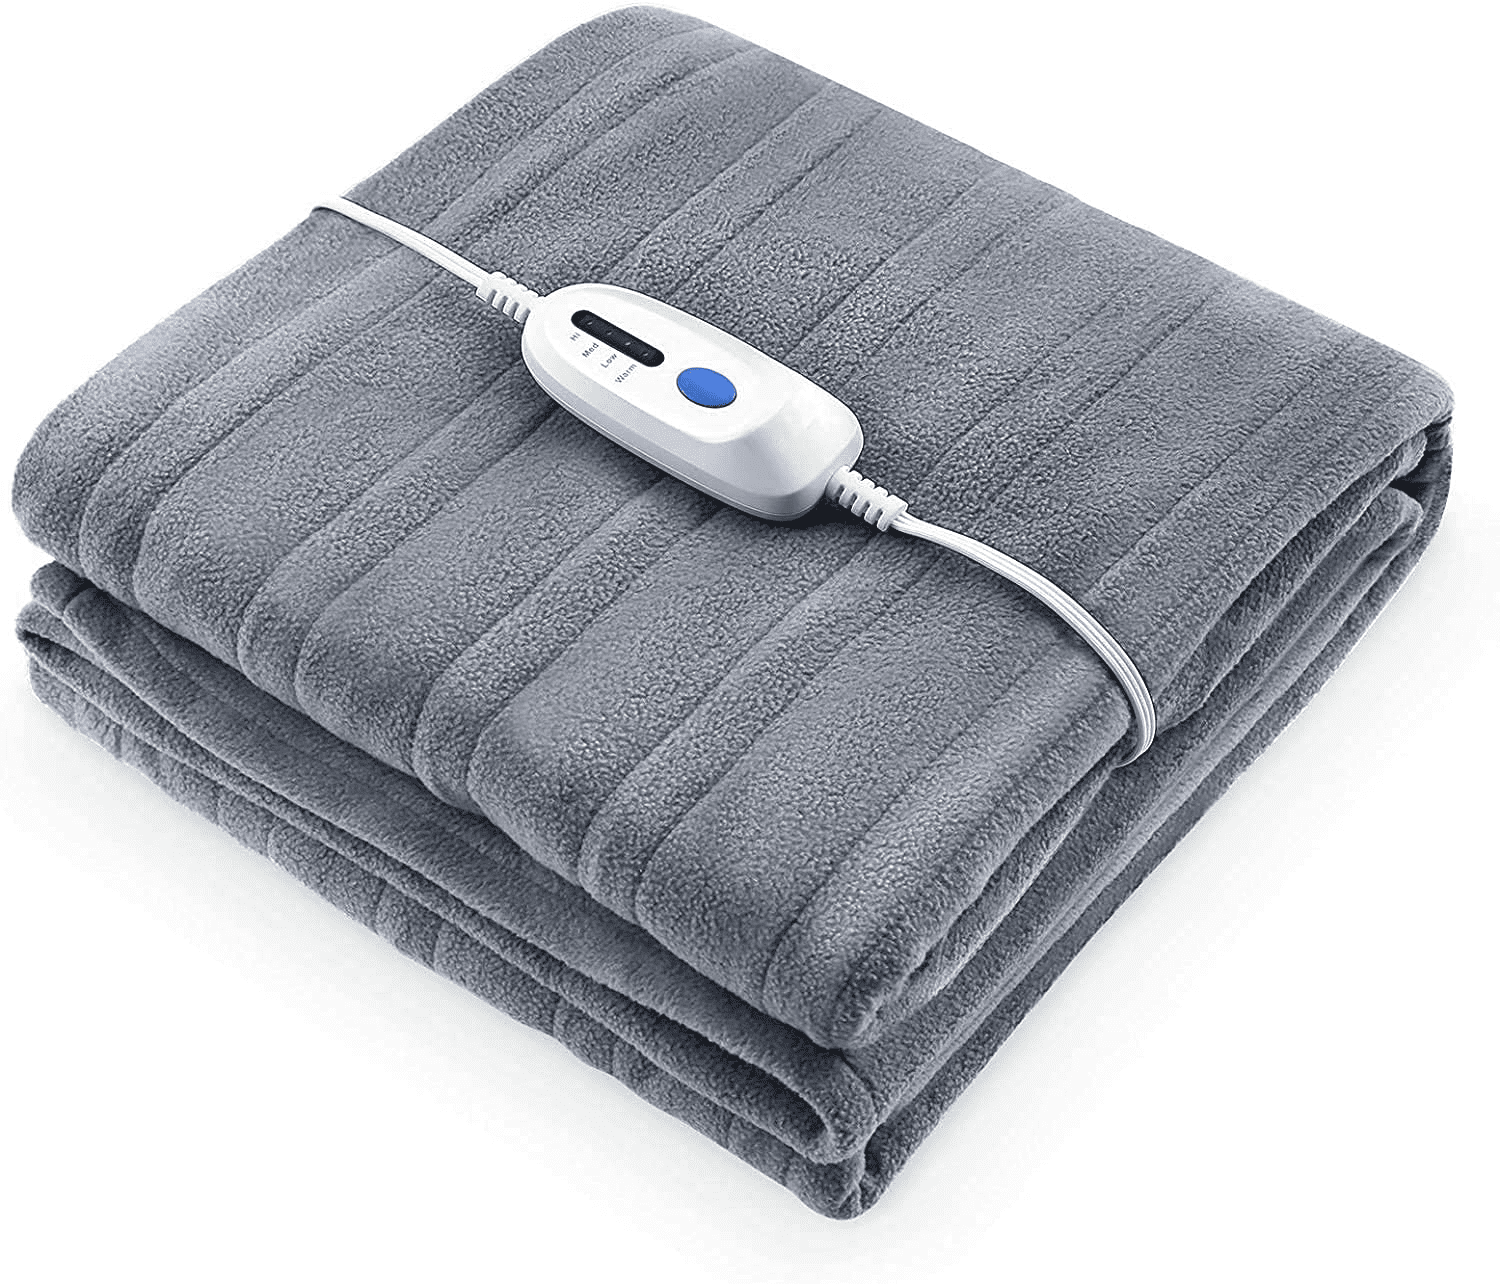 Entil Electric Heated Blanket 77" x 84" Full Size with 10H Auto-off & 4 Heating Levels, Polar Fleece, Gray - image 1 of 8